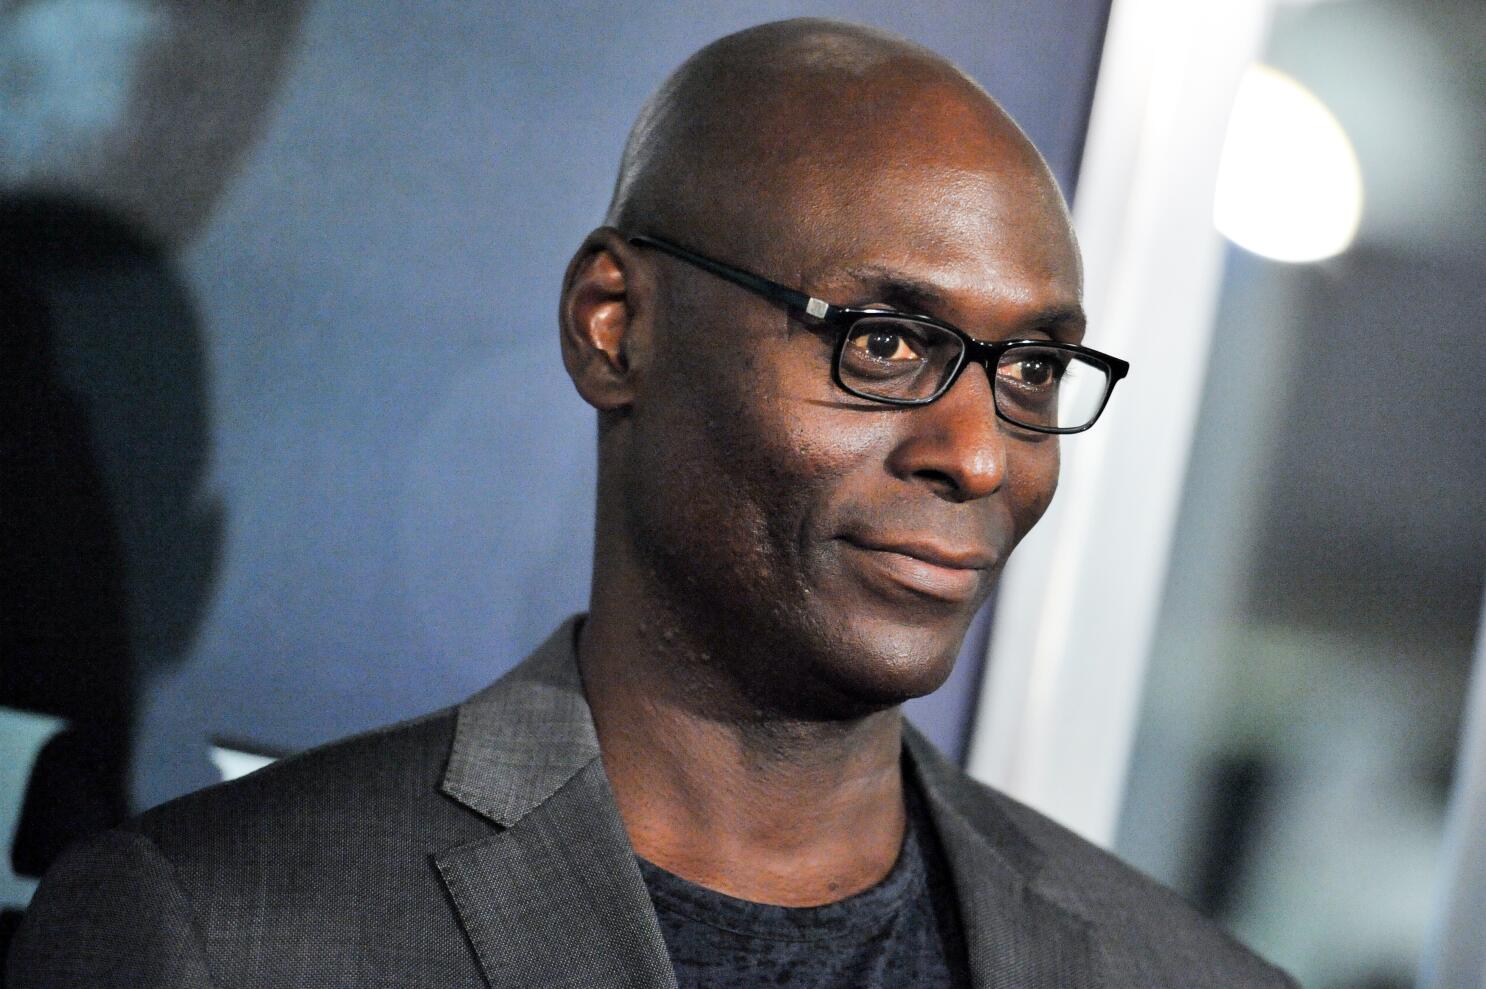 Lance Reddick's family disputes reported cause of death